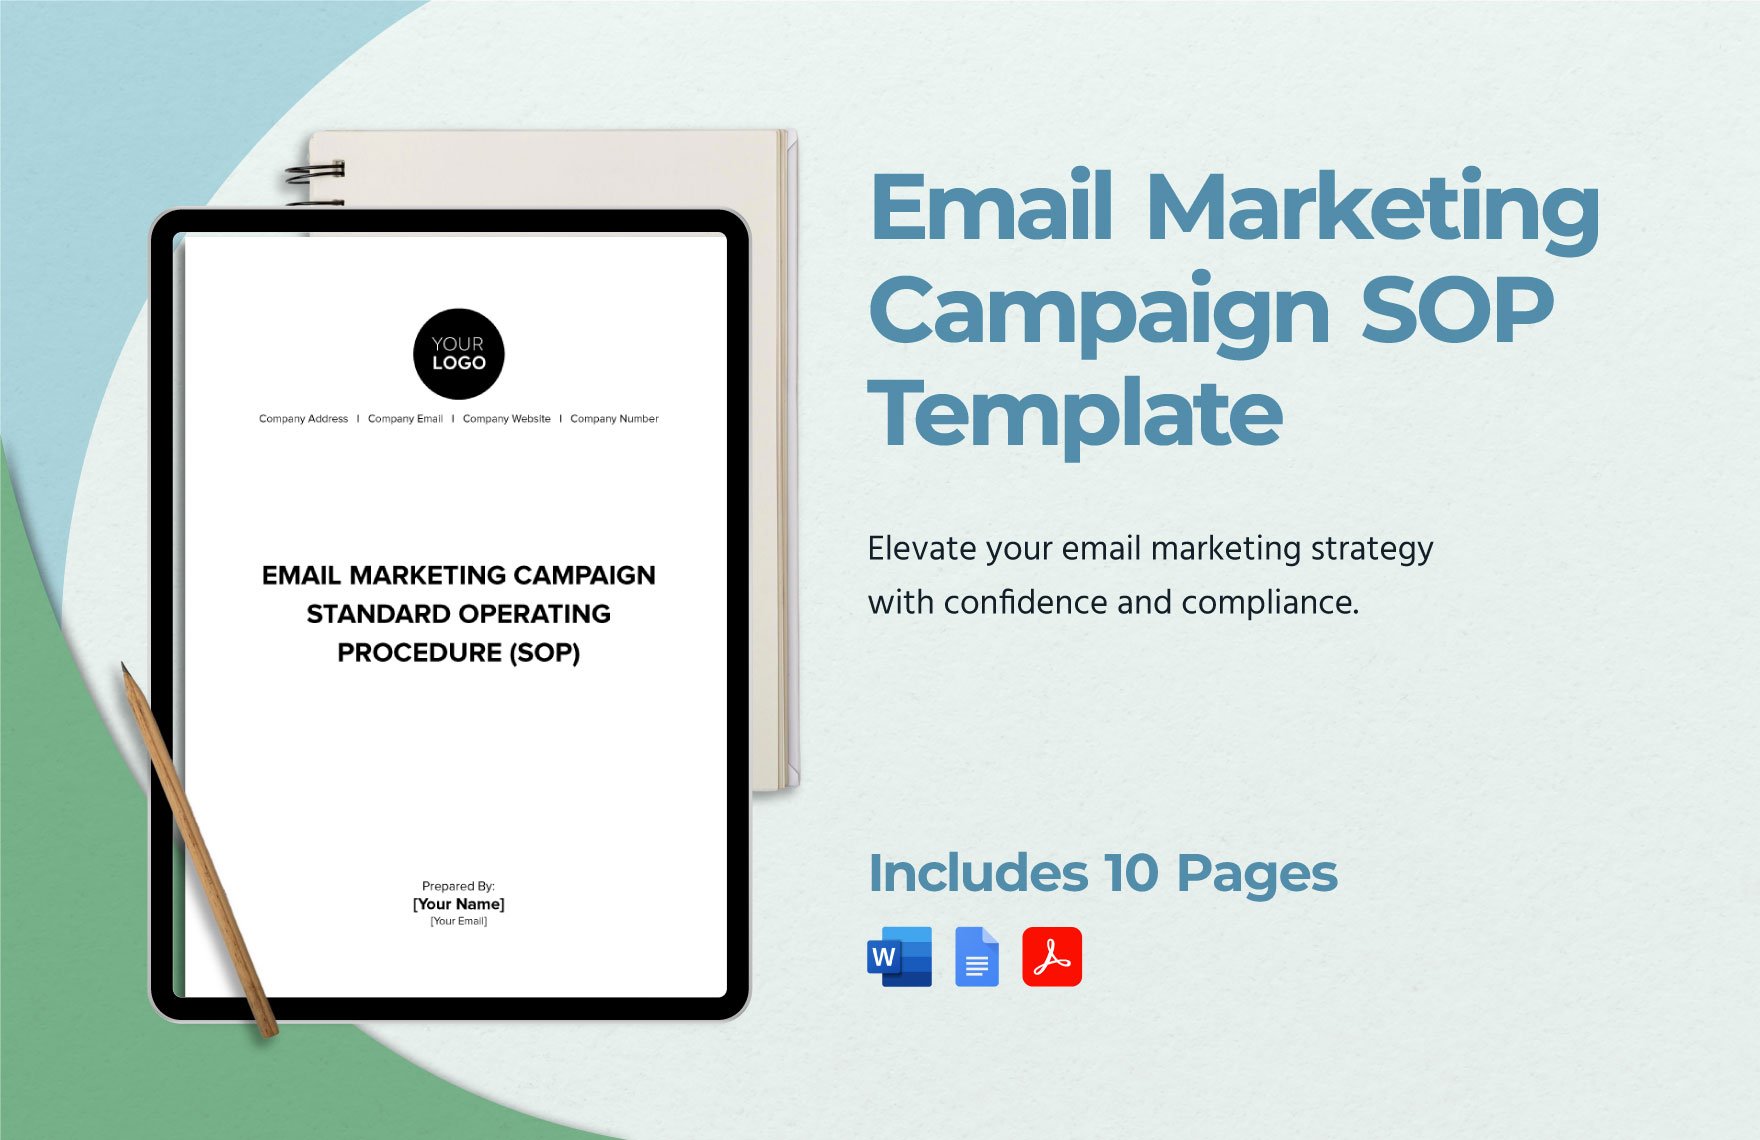 Email Marketing Campaign Standard Operating Procedure (SOP) Template